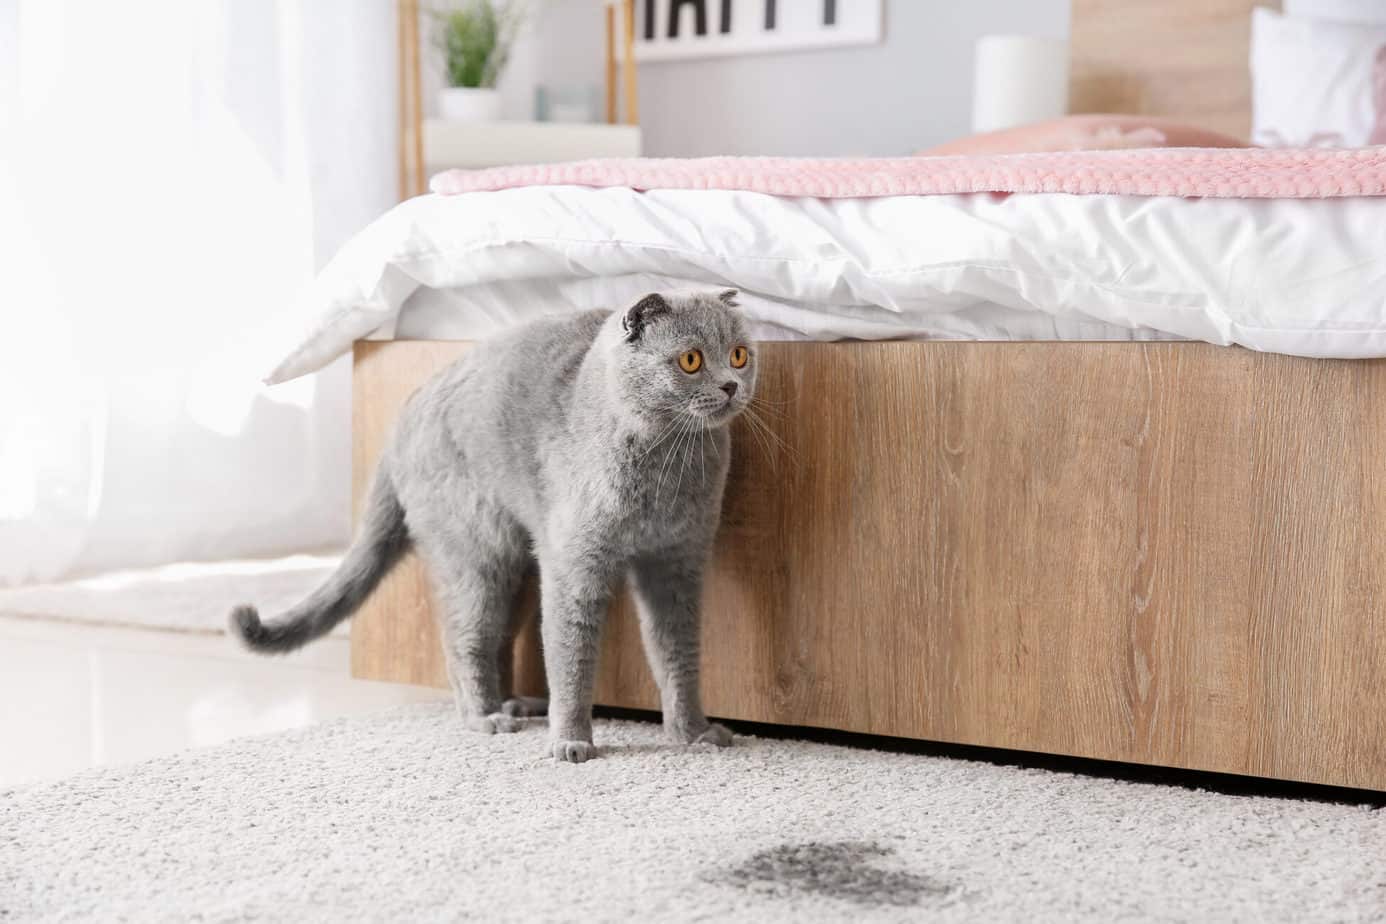 The Cat Pees In The Apartment Or Marked. What Can You Do About It?